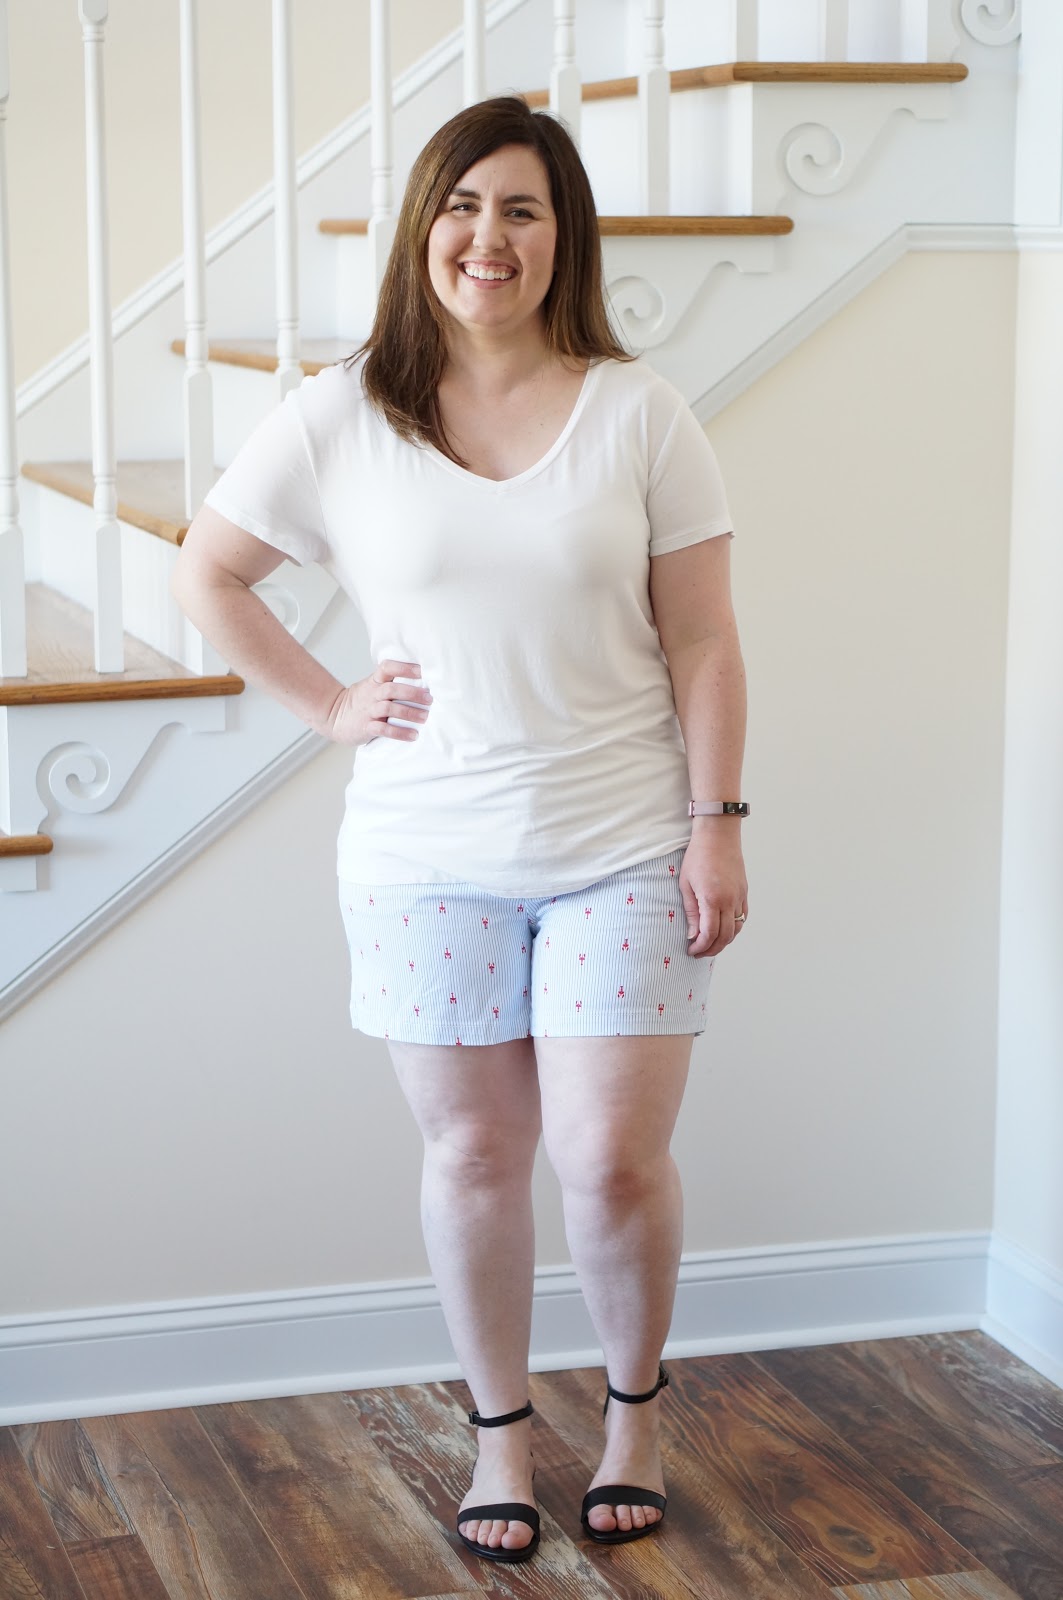 Popular North Carolina style blogger Rebecca Lately shares her Stitch Fix outfits for May 2018.  Click here to see what she got & what she thought!